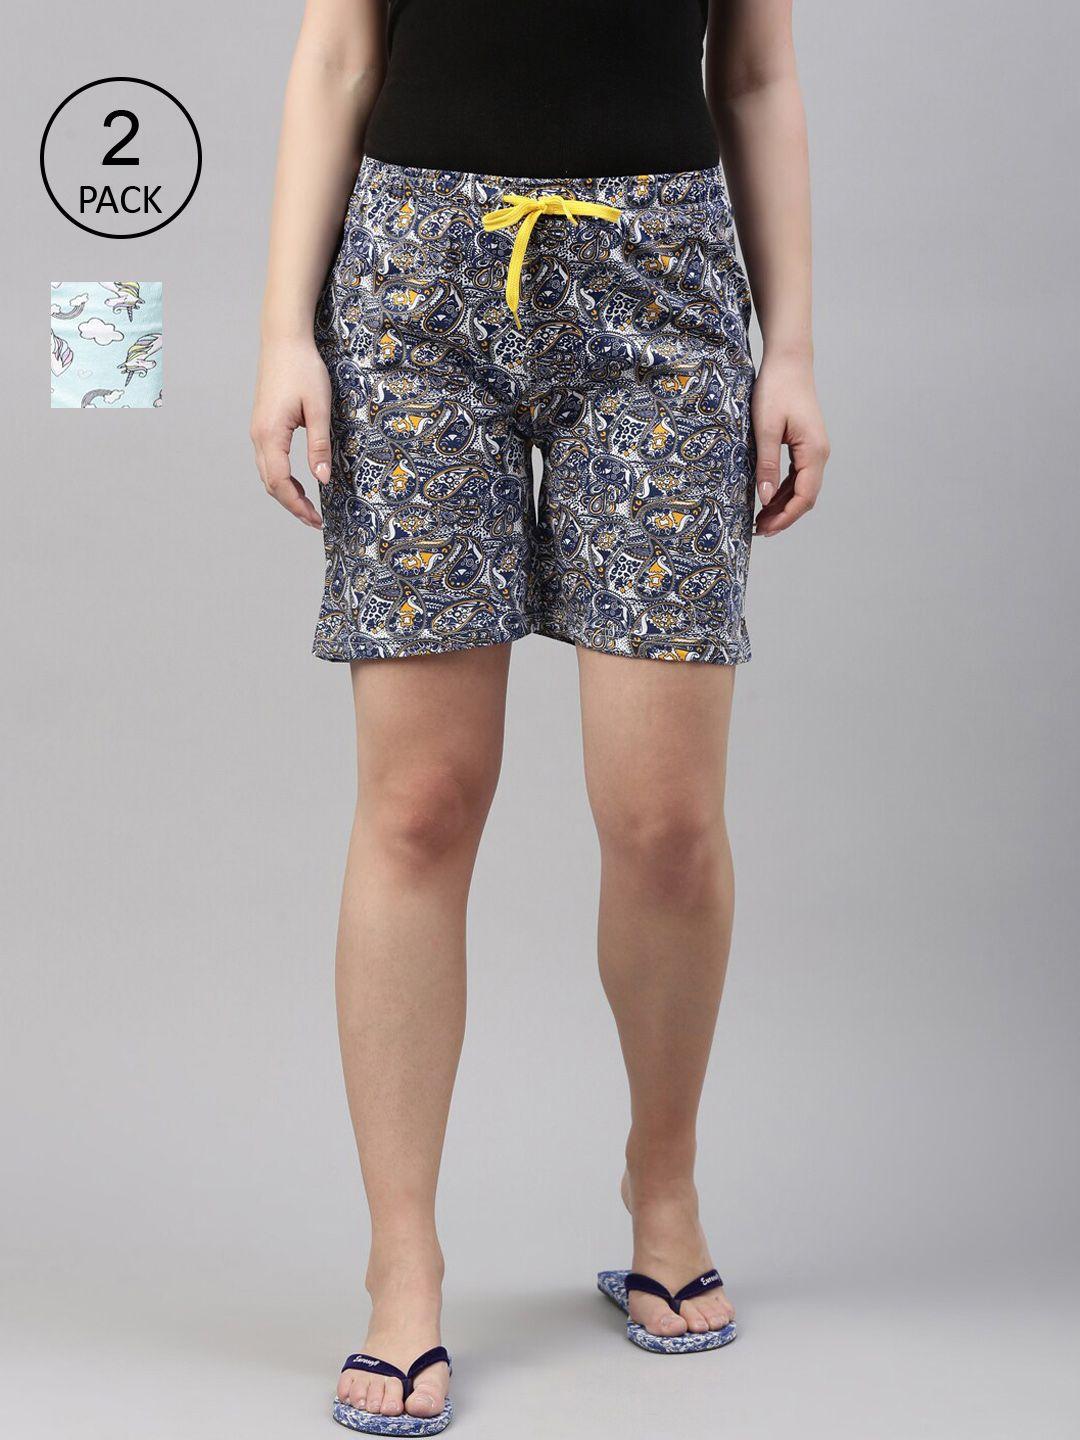 kryptic-pack-of-2-women-blue-conversational-printed-cotton-shorts